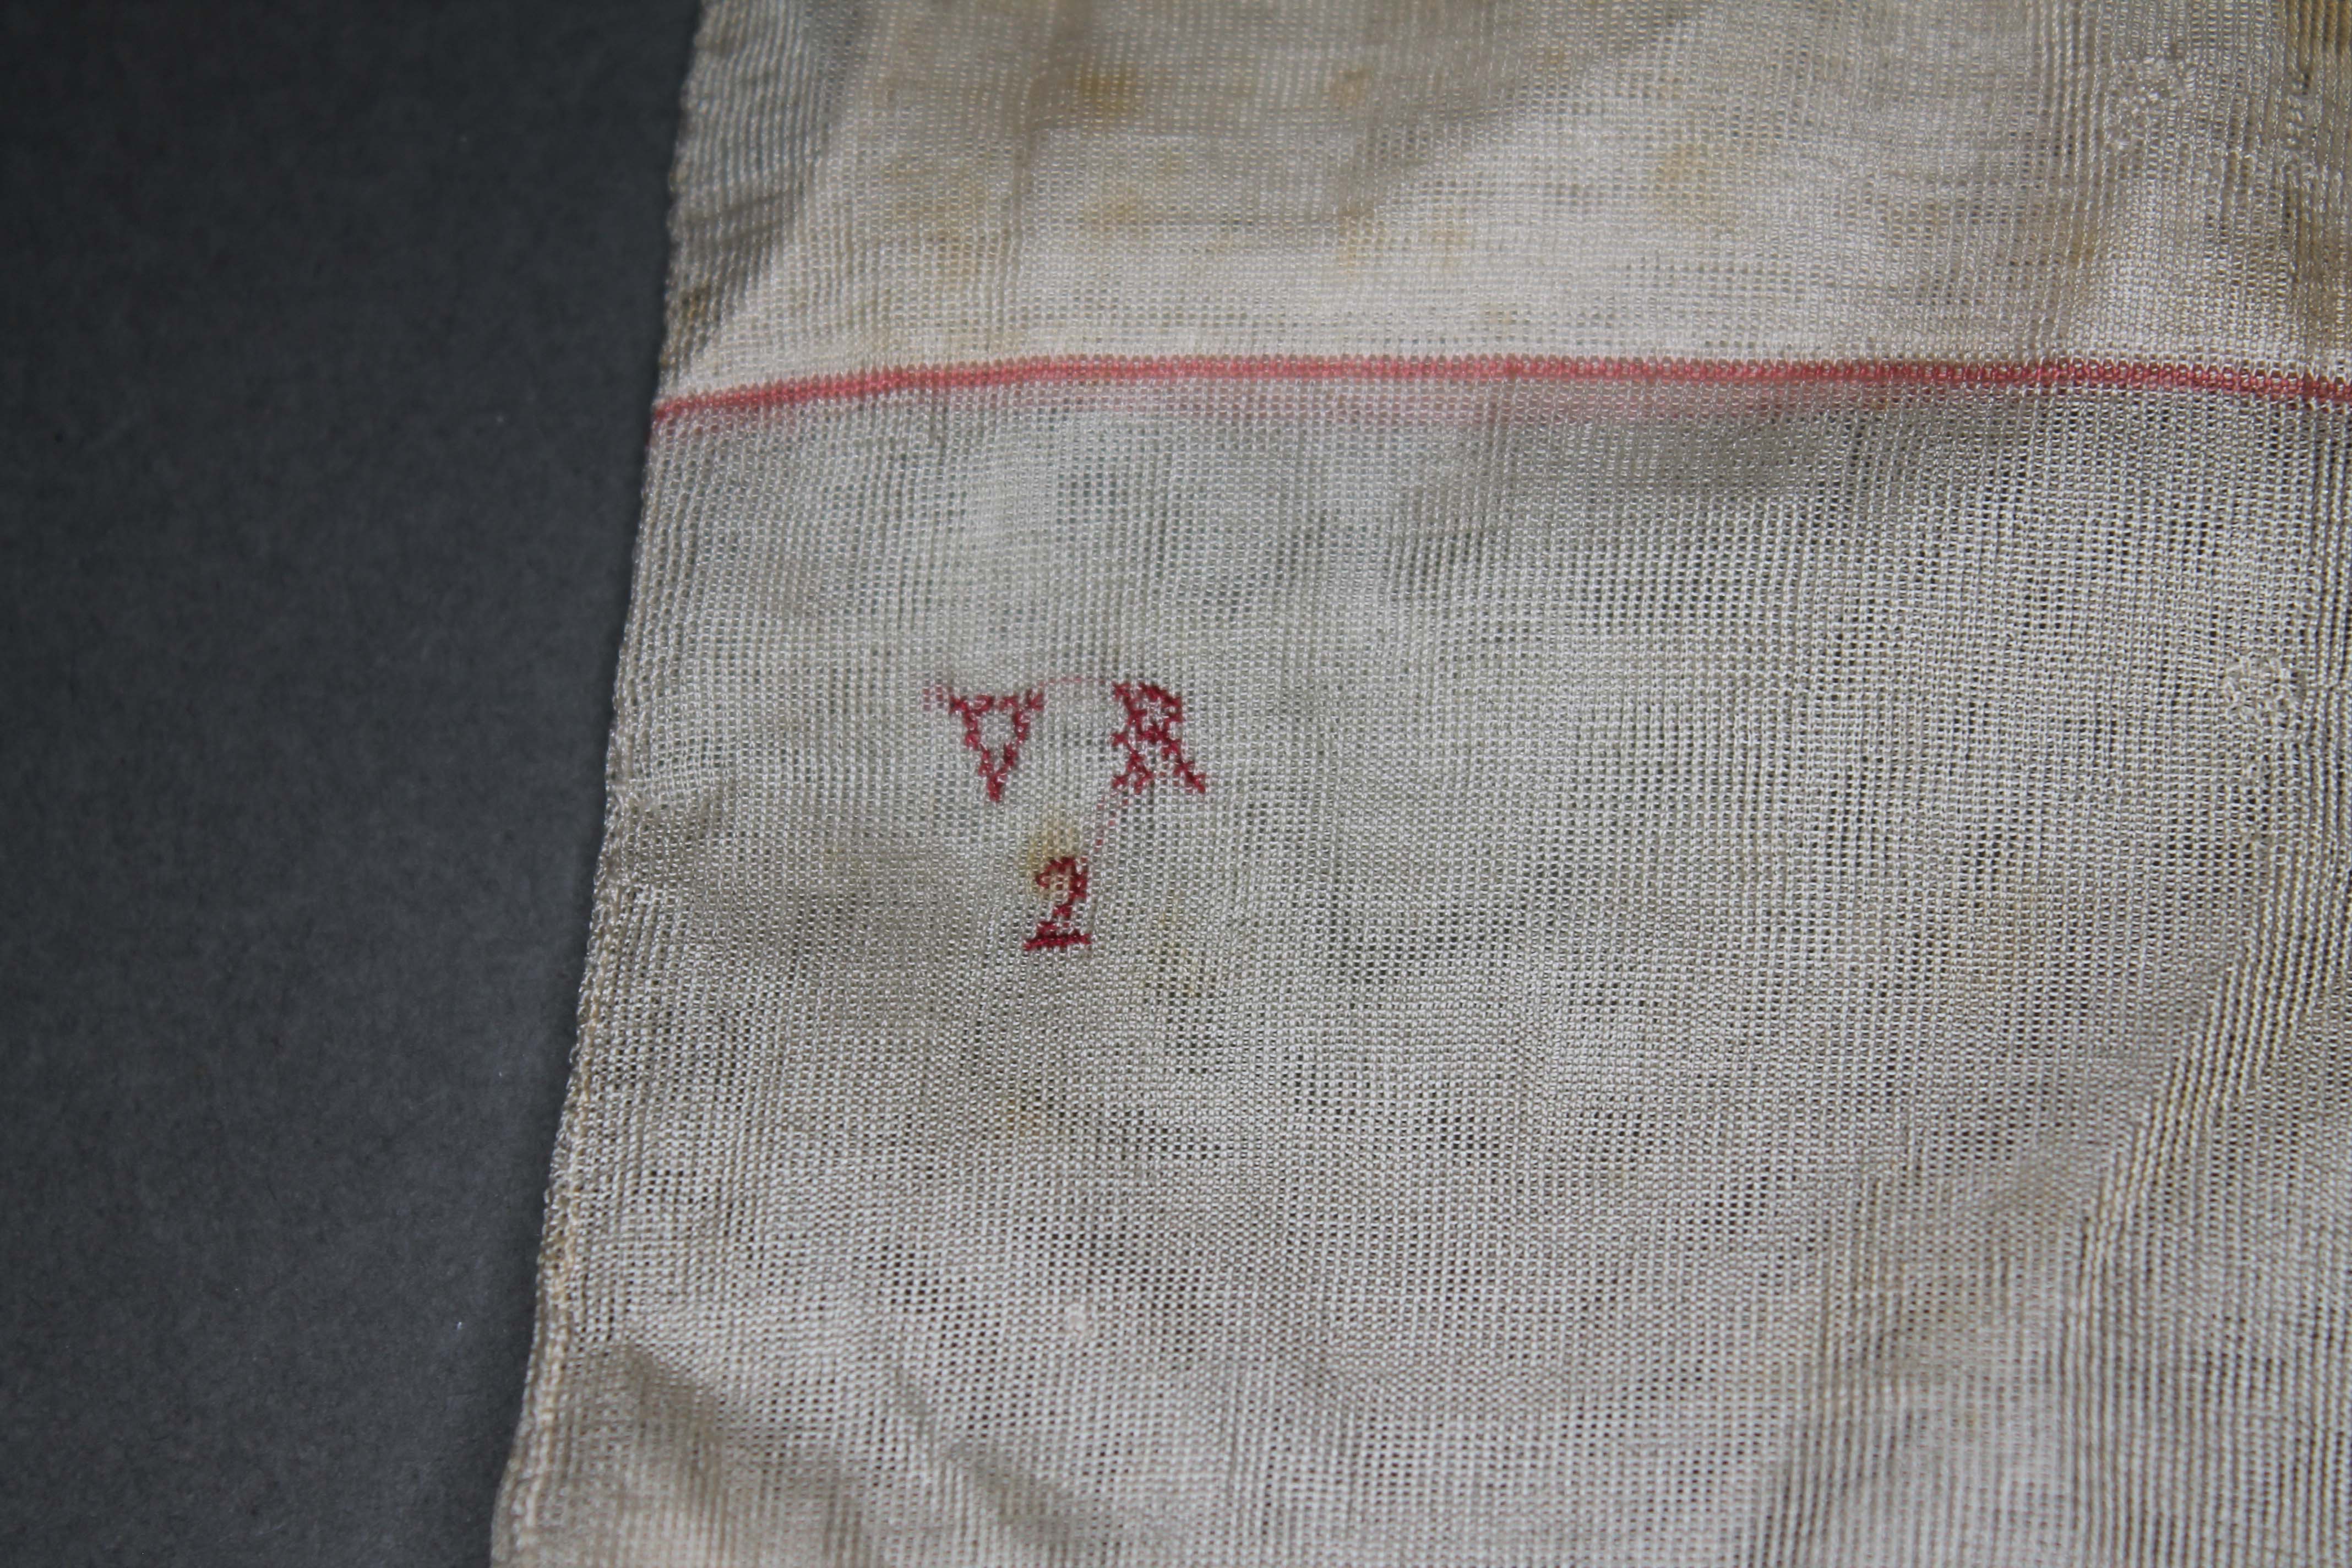 A pair of Silk stockings reputedly once belonging to Queen Victoria, monogrammed 'VR2' above a - Bild 2 aus 2